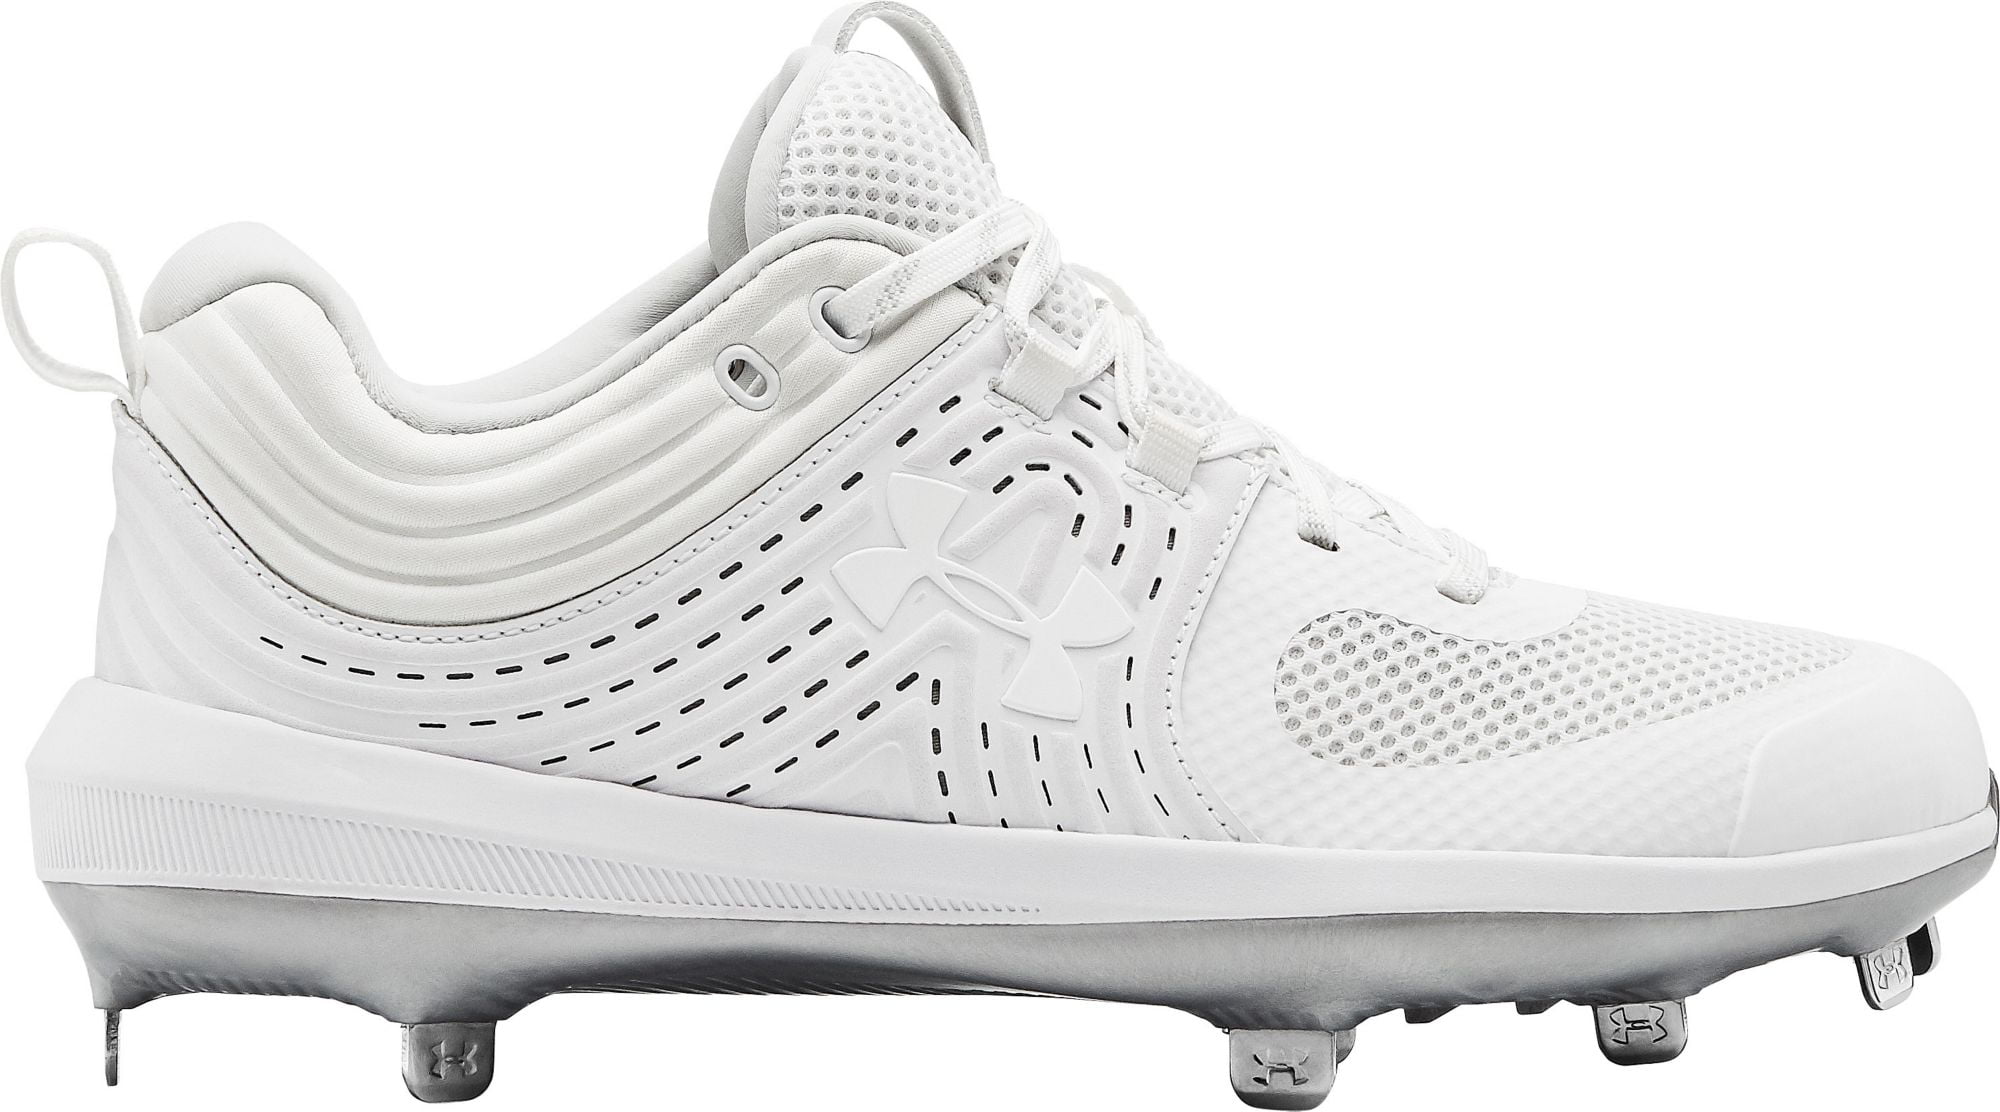 WOMEN'S SOFTBALL CLEATS GRAY & WHITE SIZE 6 to 11 BRANDED UNDER ARMOUR PINK 